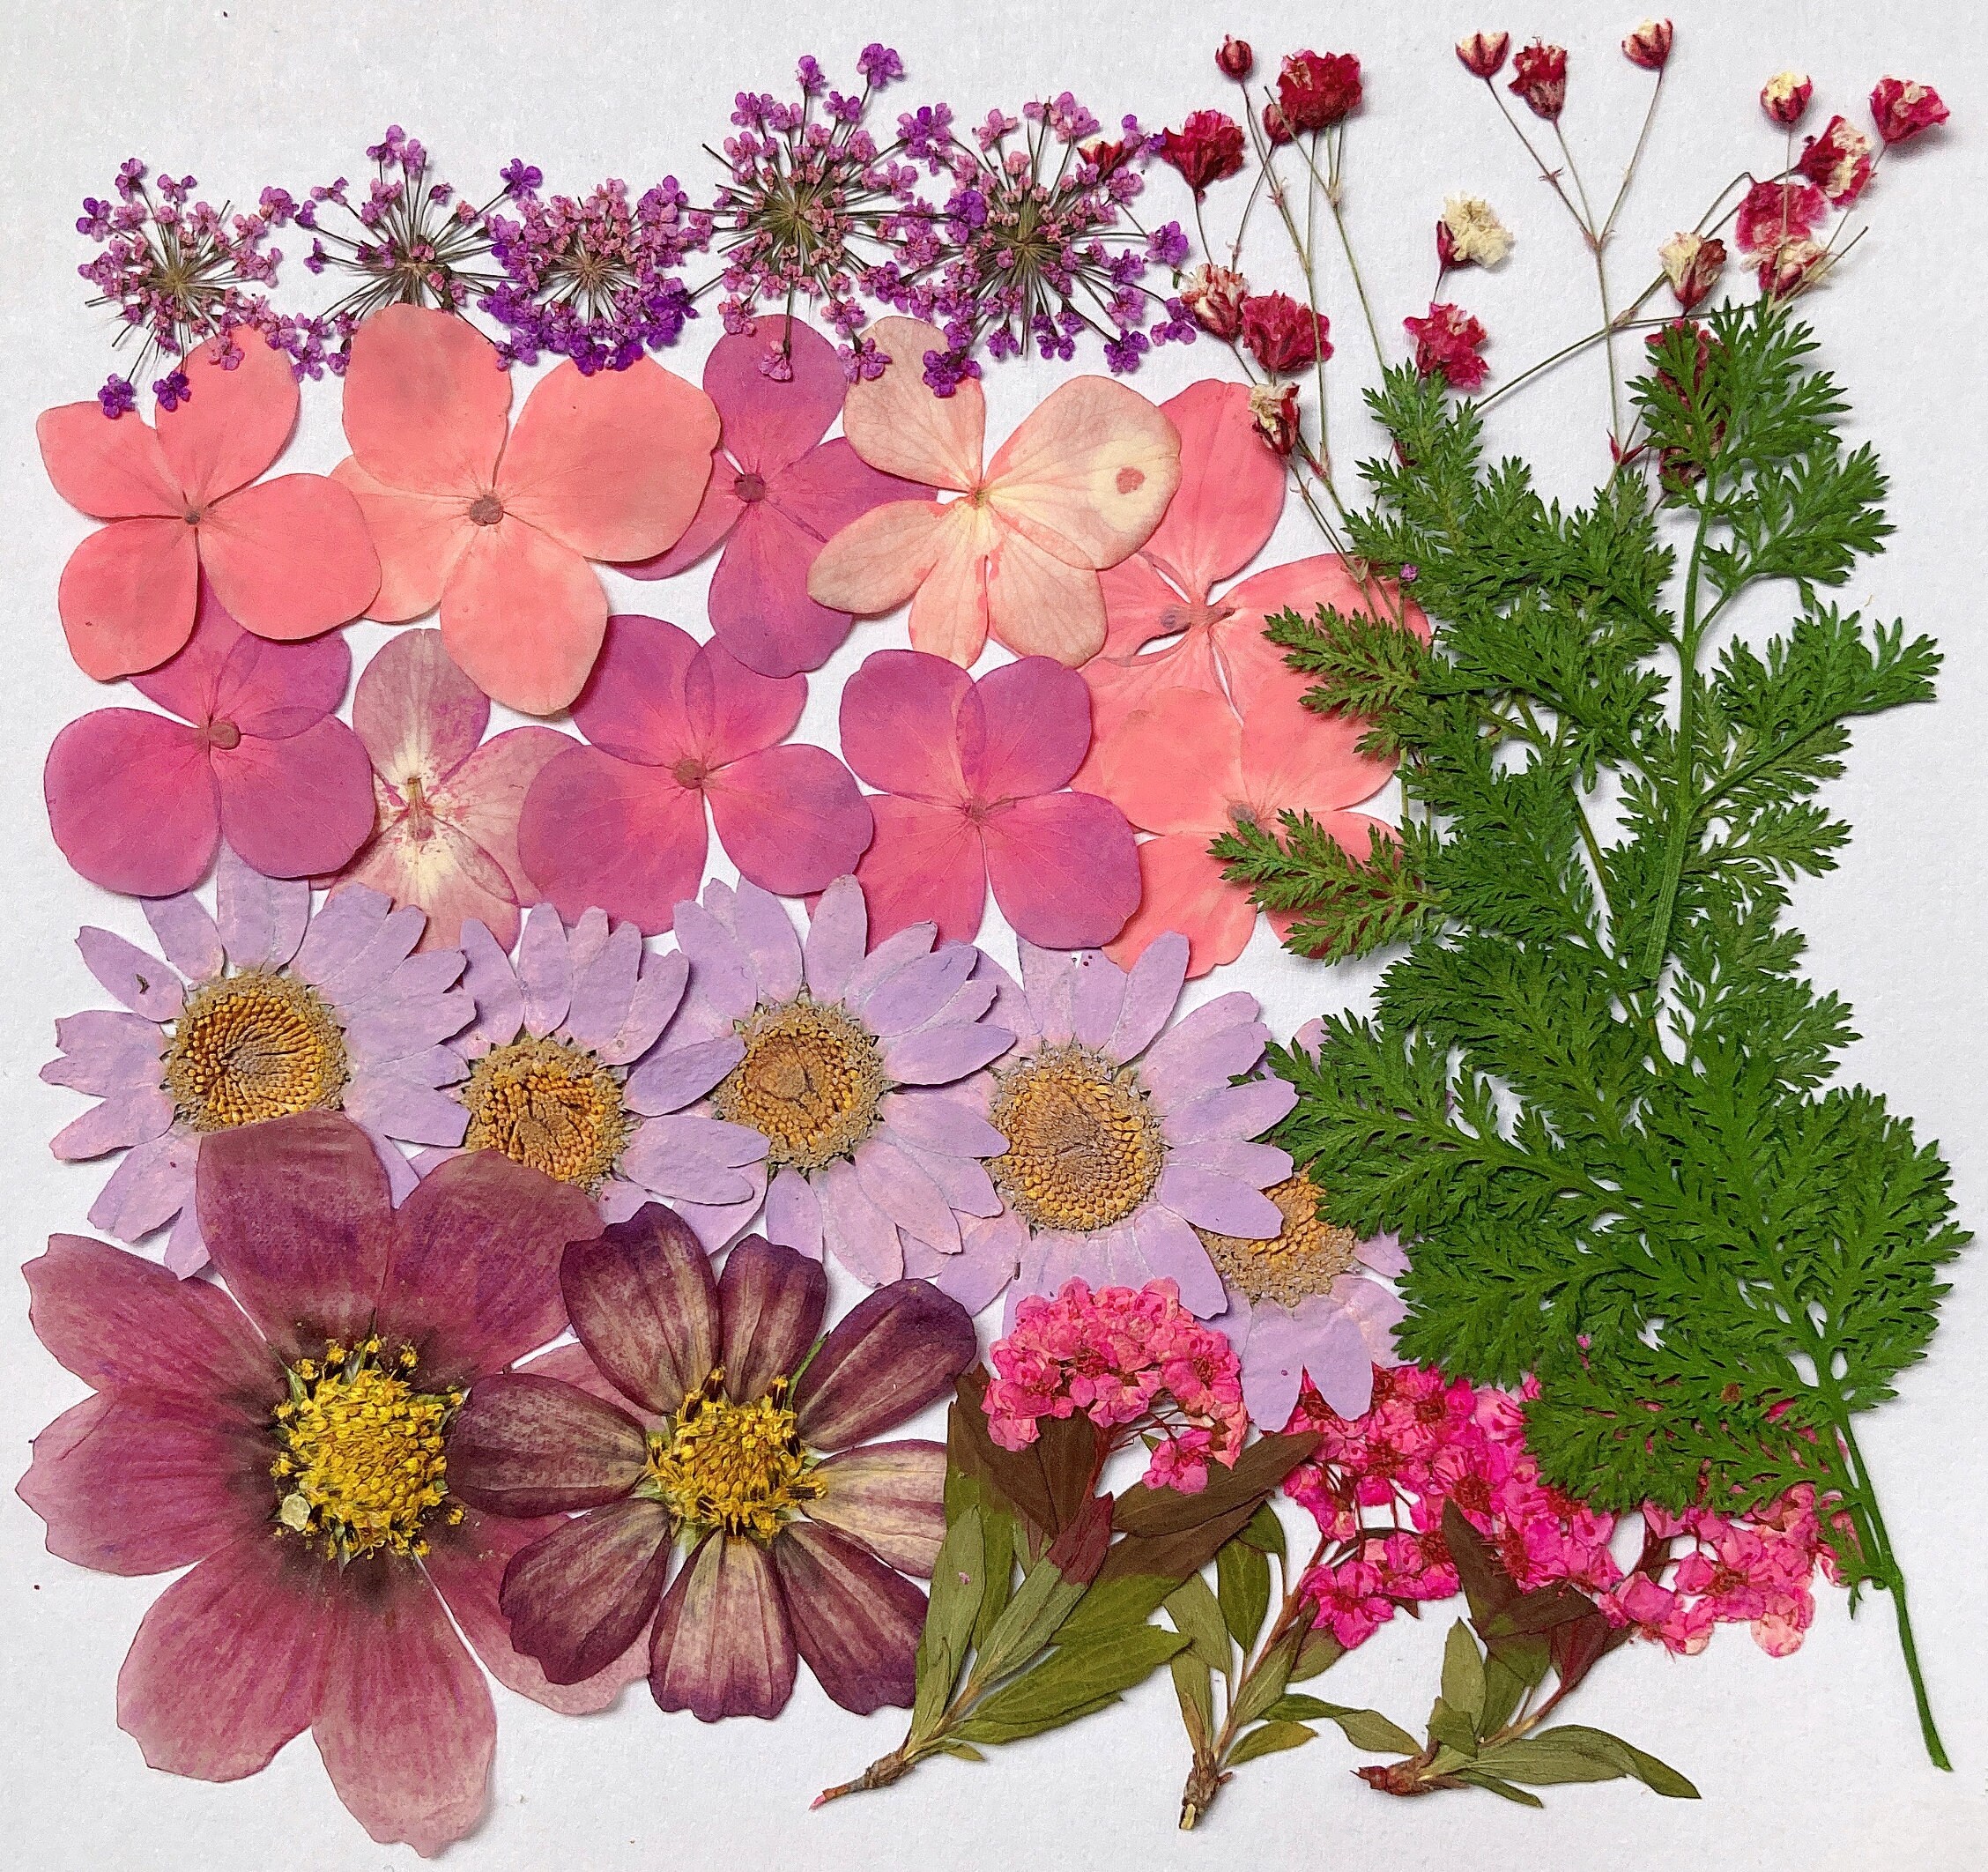 35 Piece Pink & Purple Variety Dried Pressed Real Natural Flowers